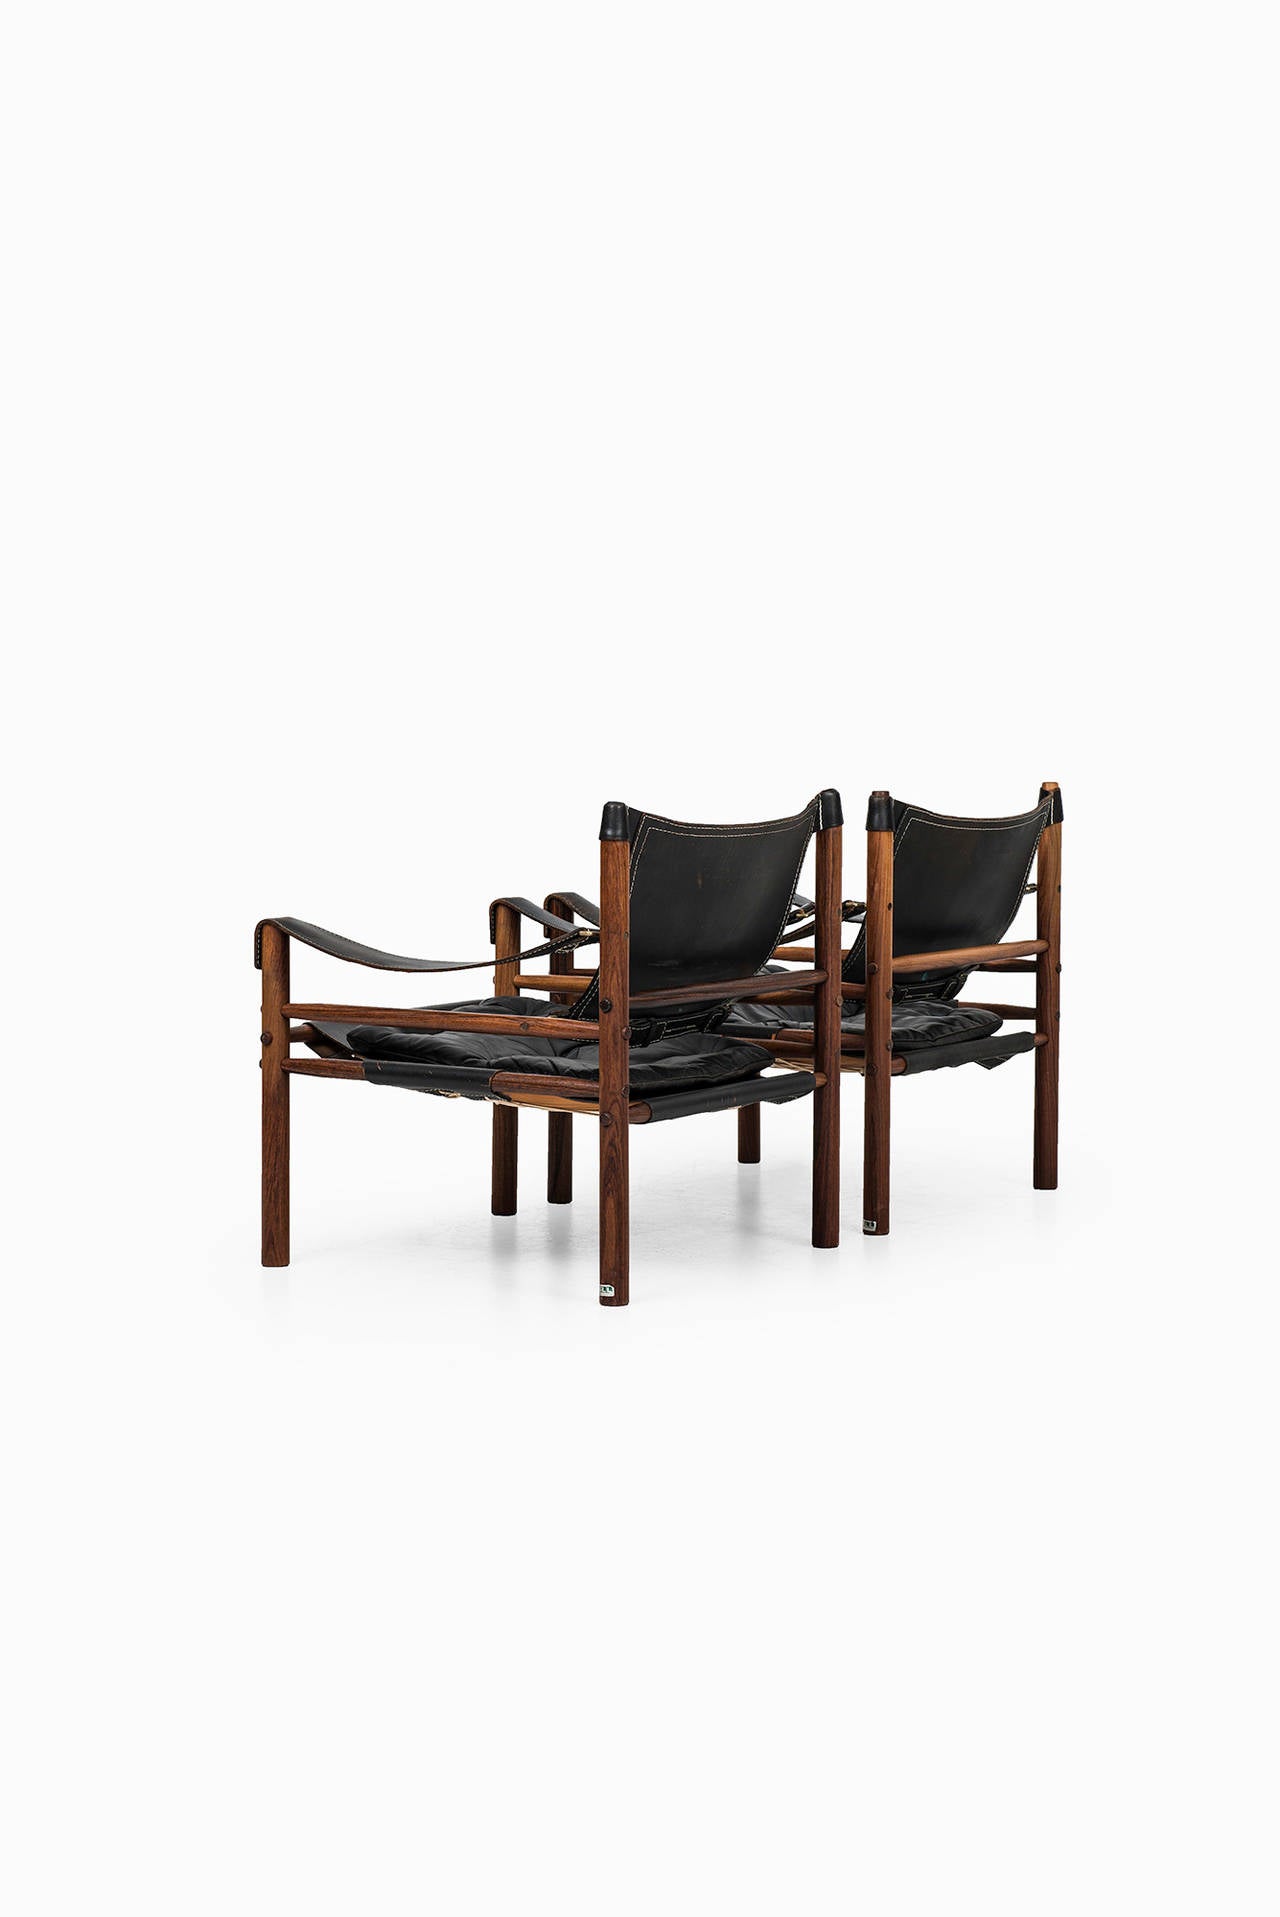 Mid-20th Century Arne Norell Sirocco Easy Chairs in Rosewood and Black Leather